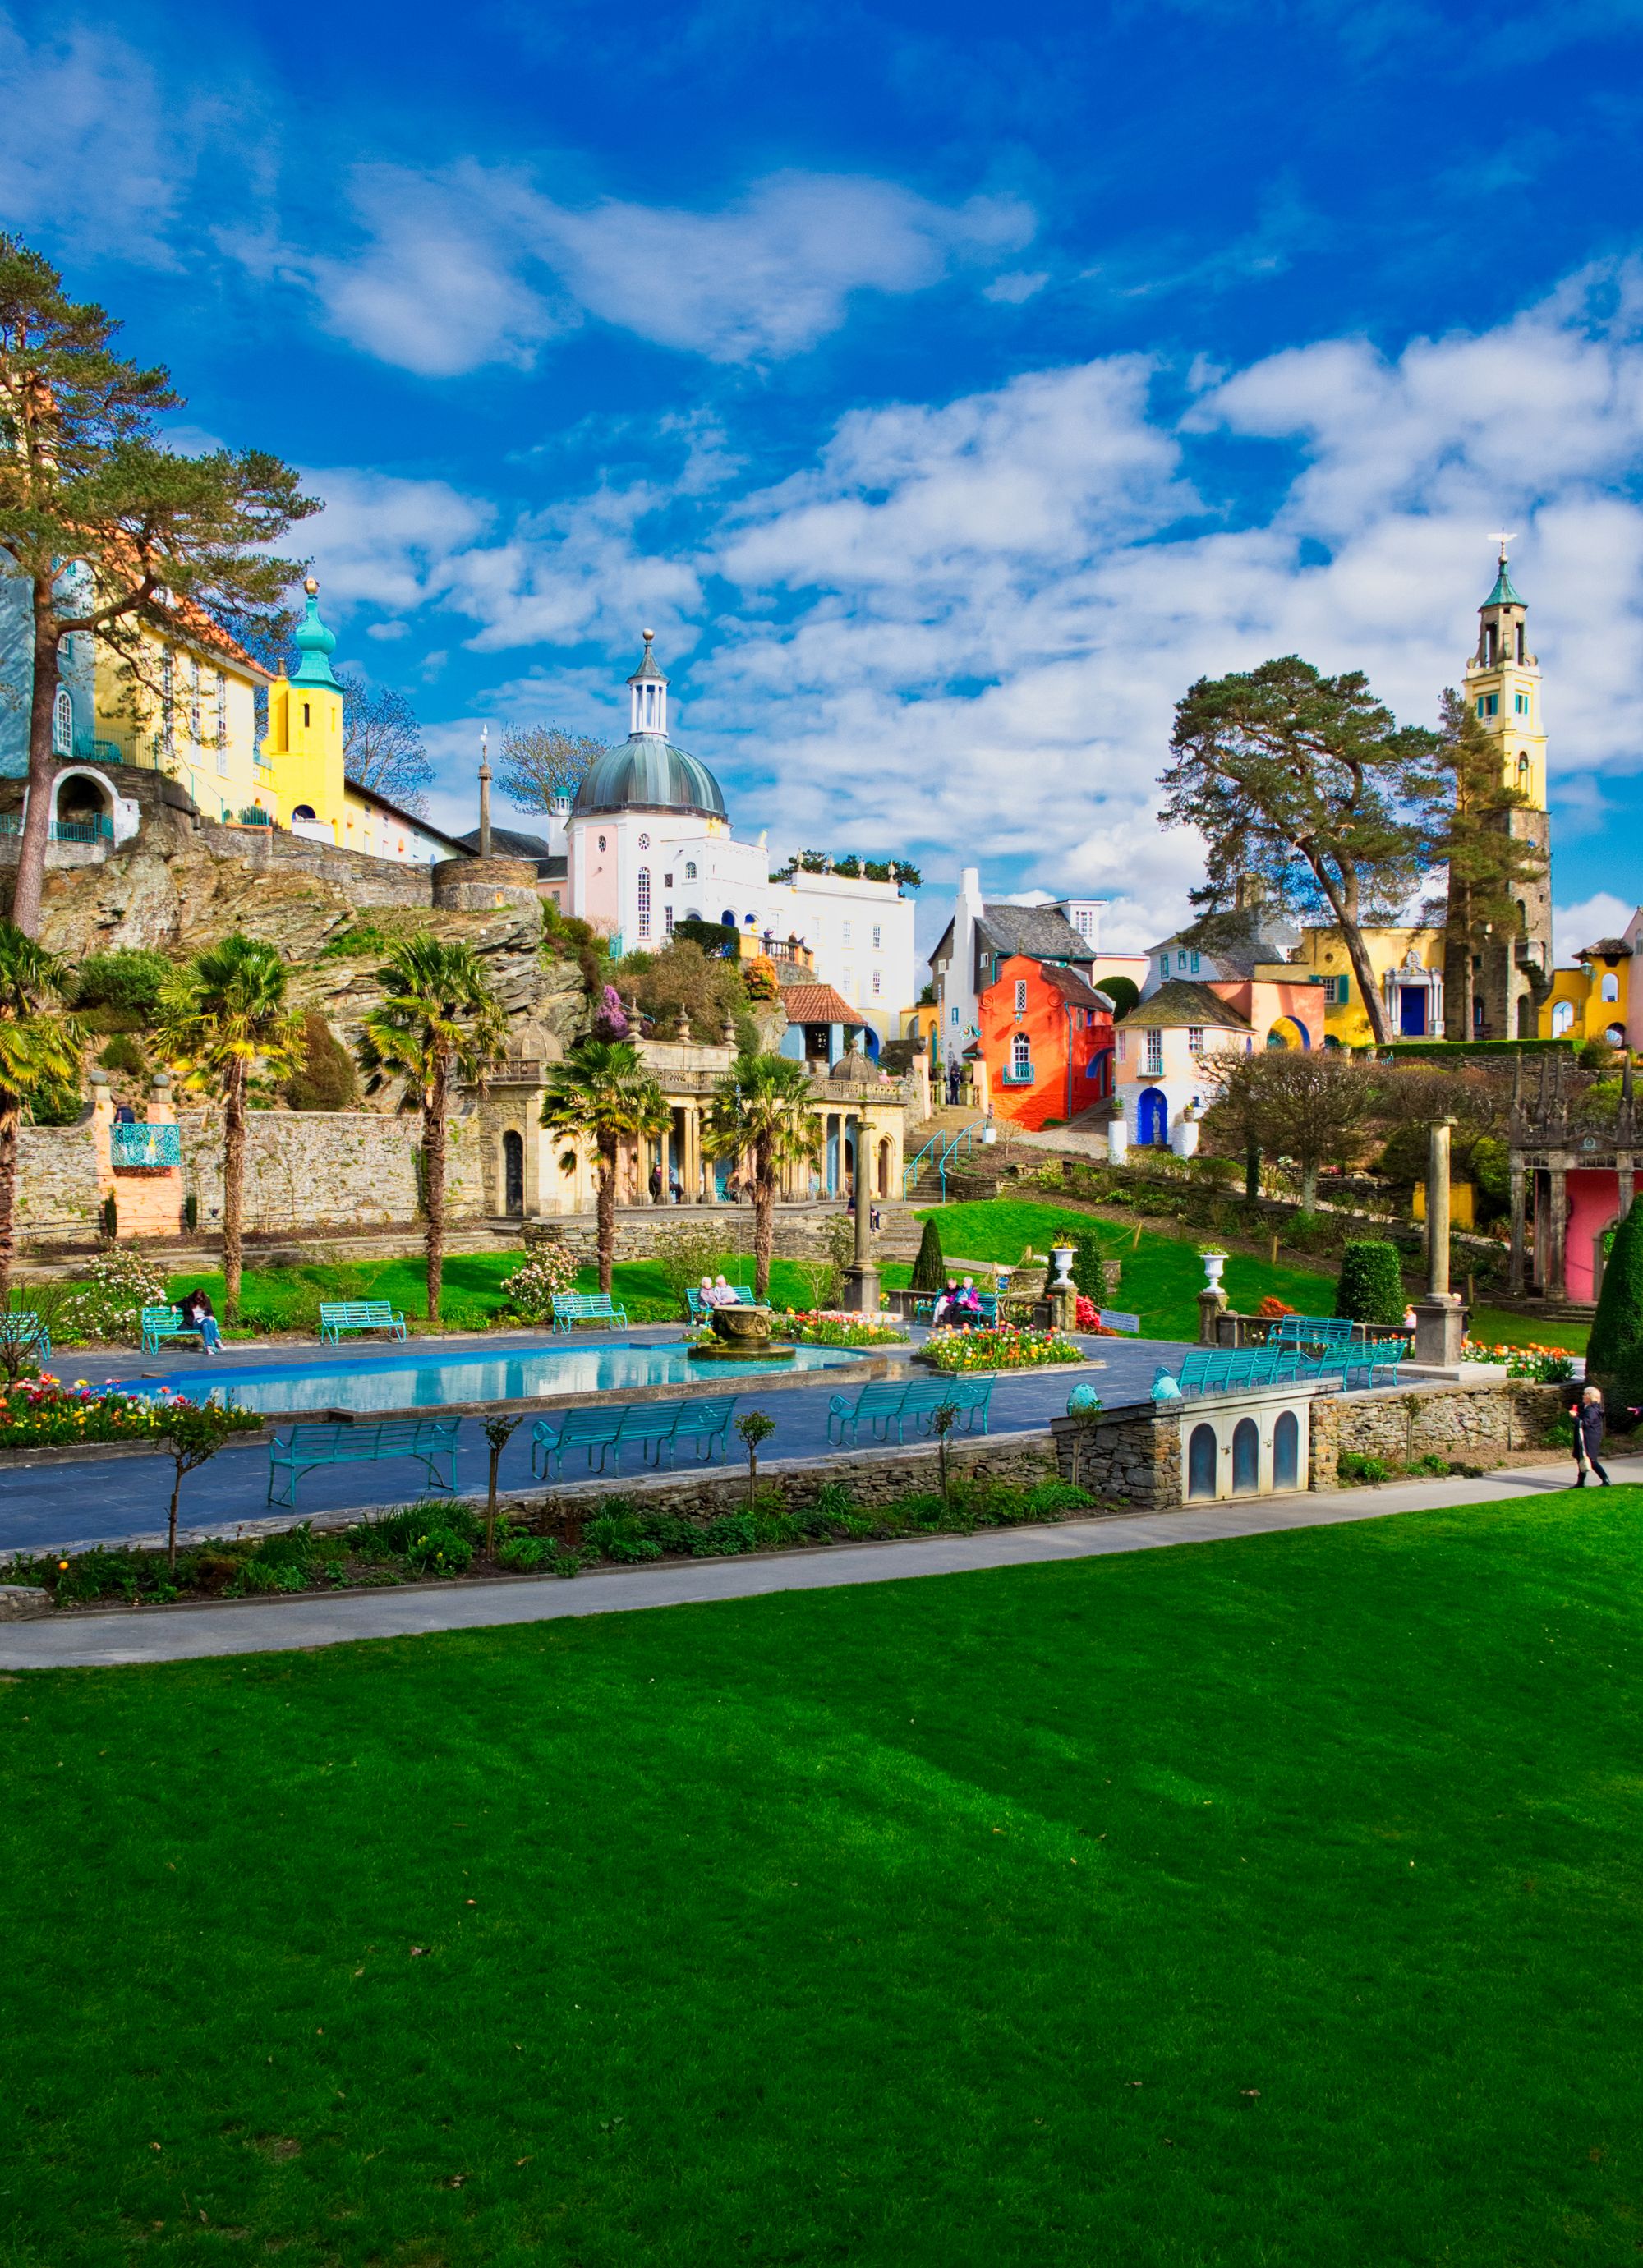 Colorful Italian Style Buildings and Gardens of Portmeirion, North Wales